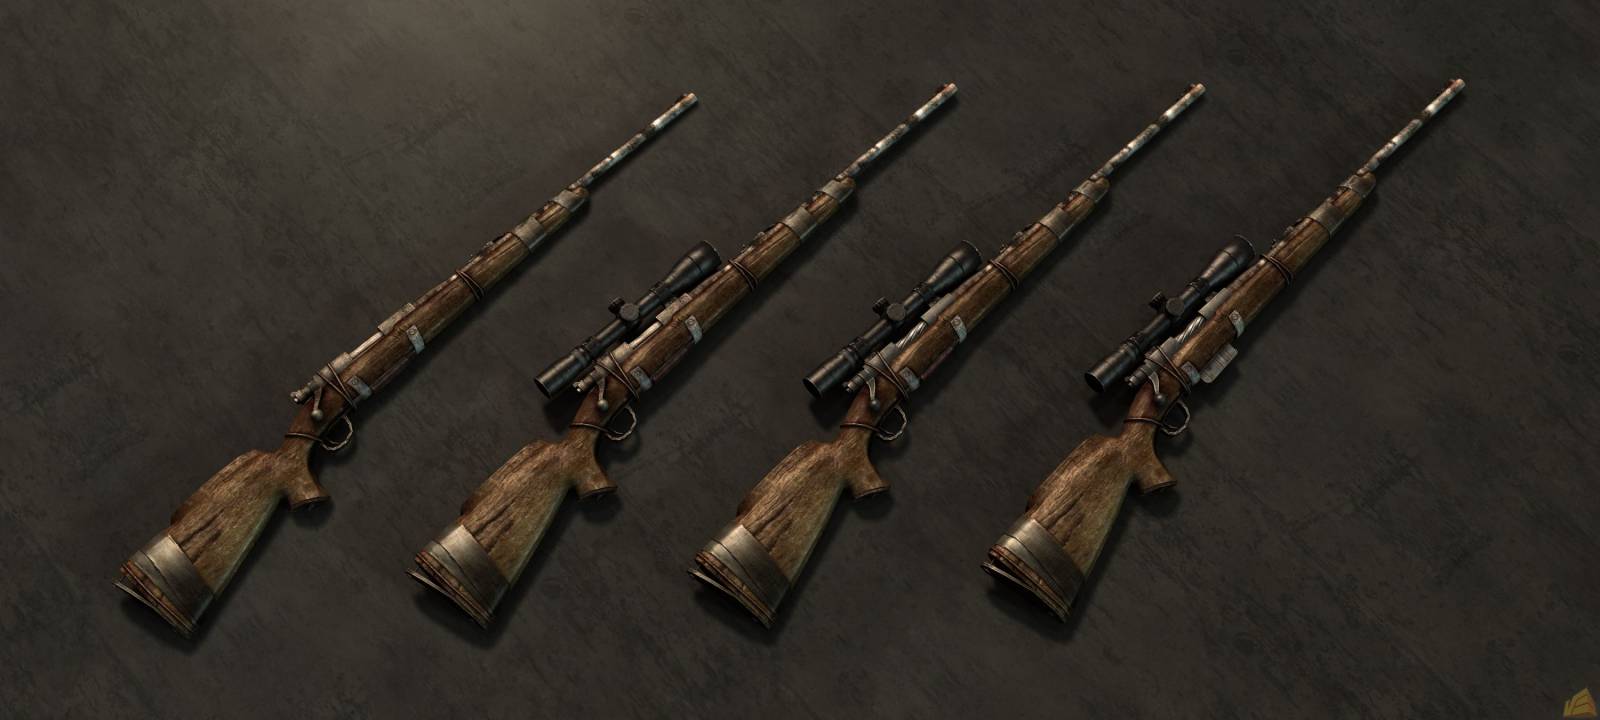 Fallout 4 new vegas weapons фото 86